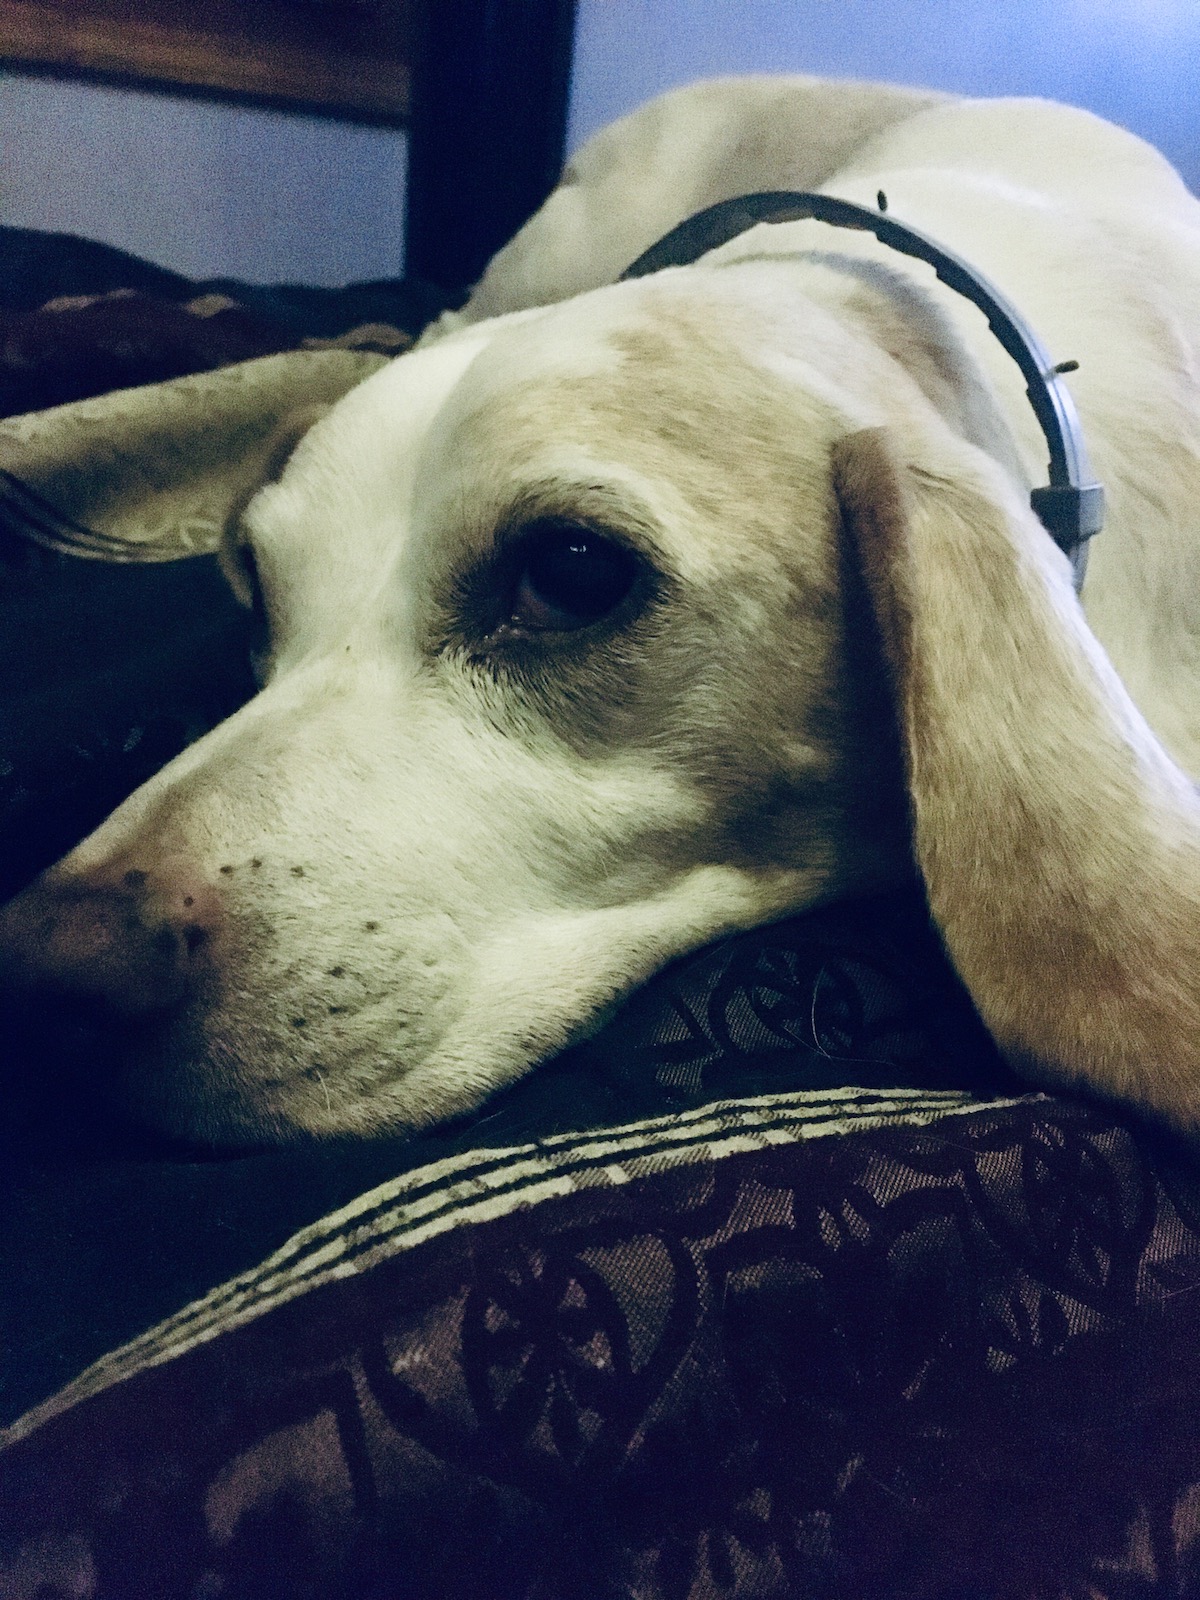 A close up shot of a beagle's face, resting on a couch